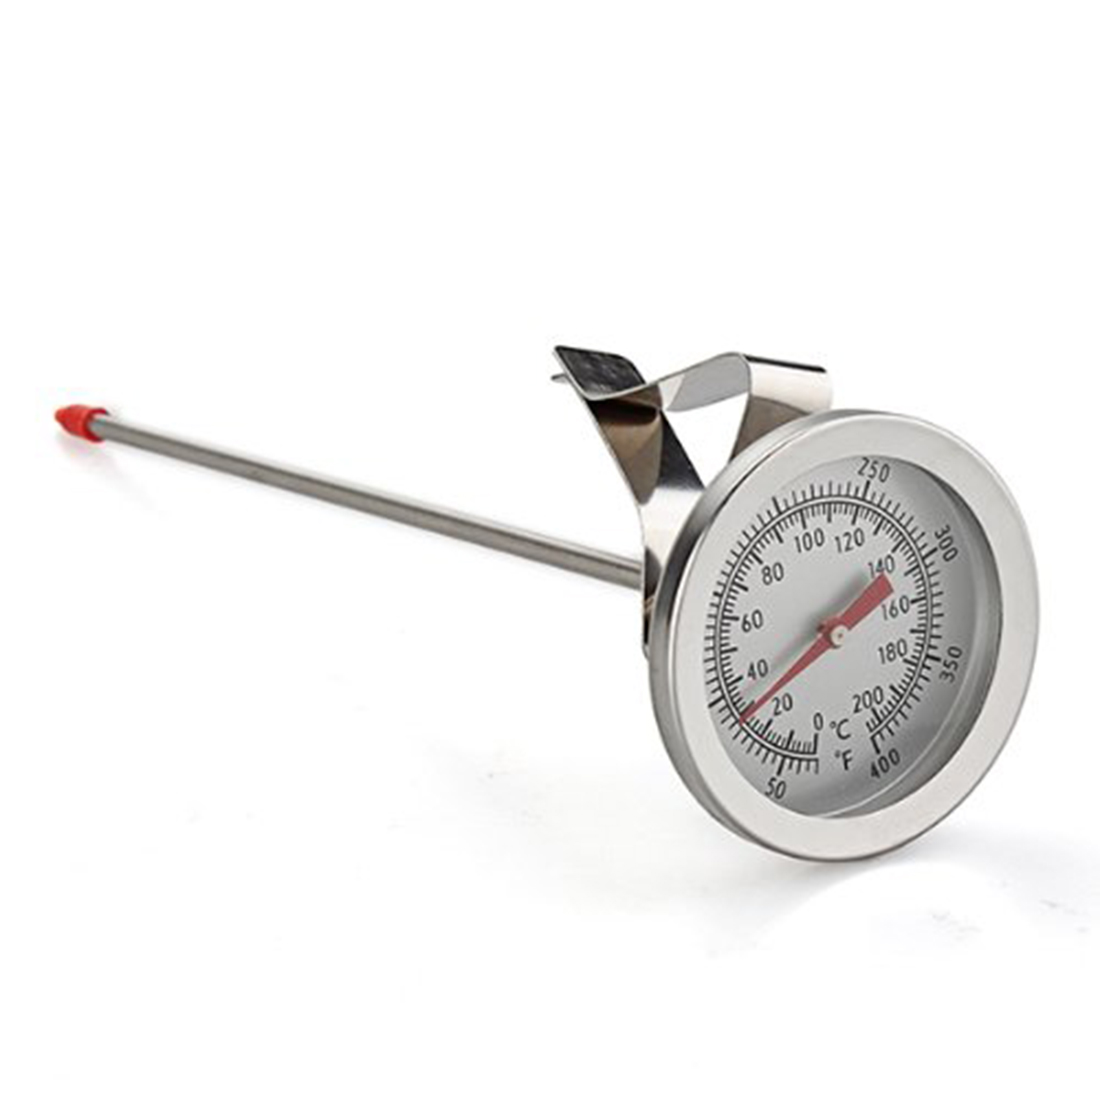 High Quality Stainless Steel Cooking Oven BBQ Barbecue Probe Metal Thermometer Food Meat Gauge 200 Degree